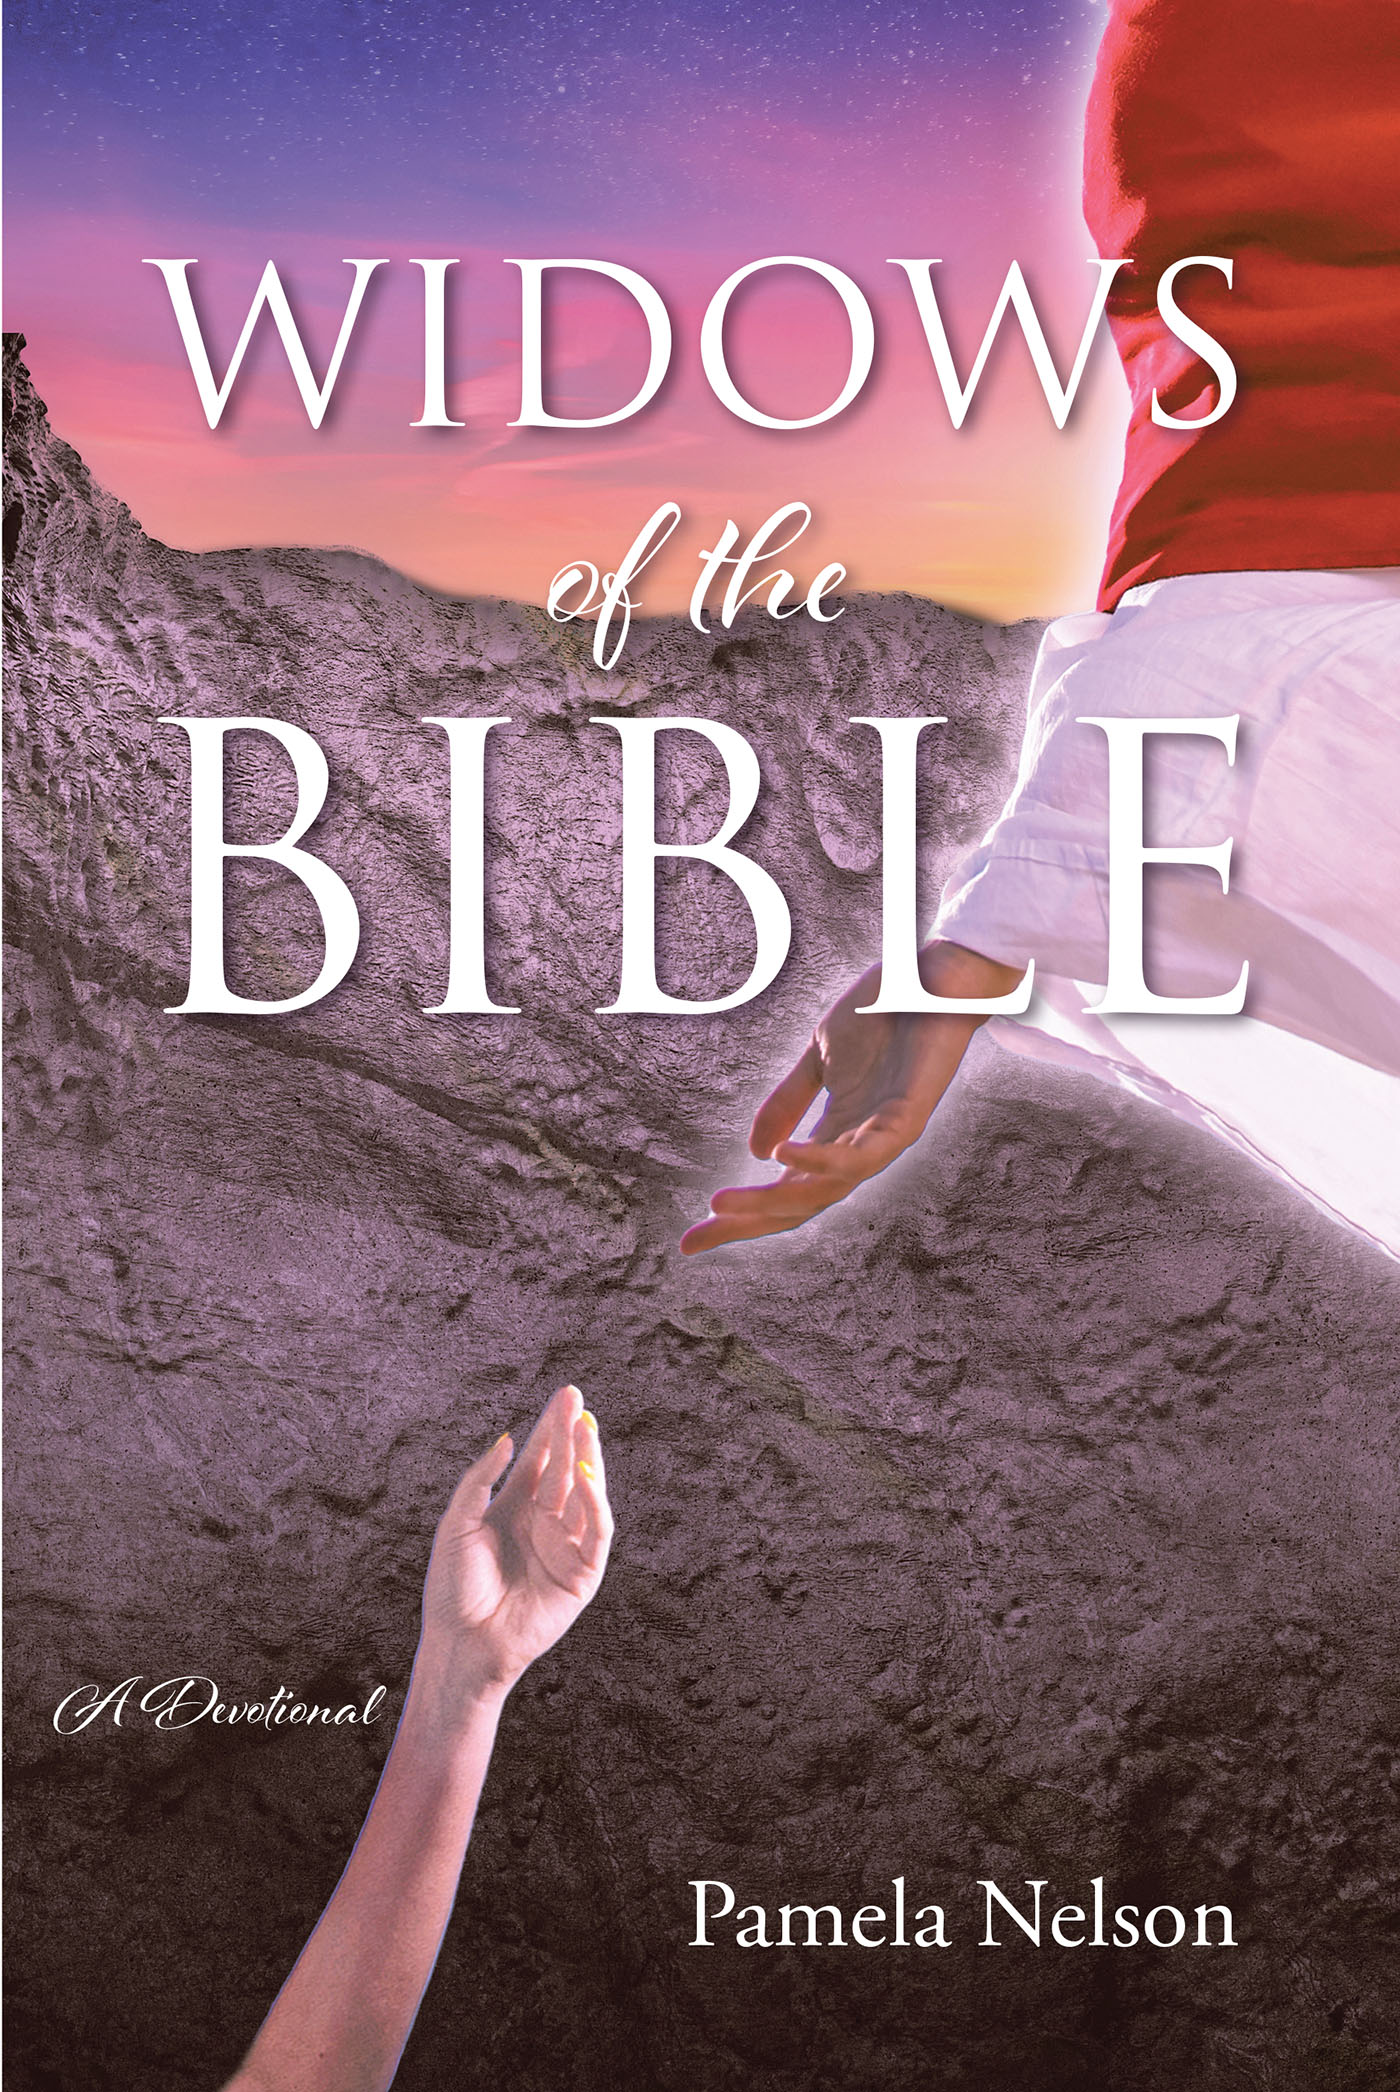 Pamela Nelson’s Newly Released "Widows of the Bible" is a Heartfelt Devotional Developed to Bring Comfort and Reassurance to Those Who Have Lost Their Spouse